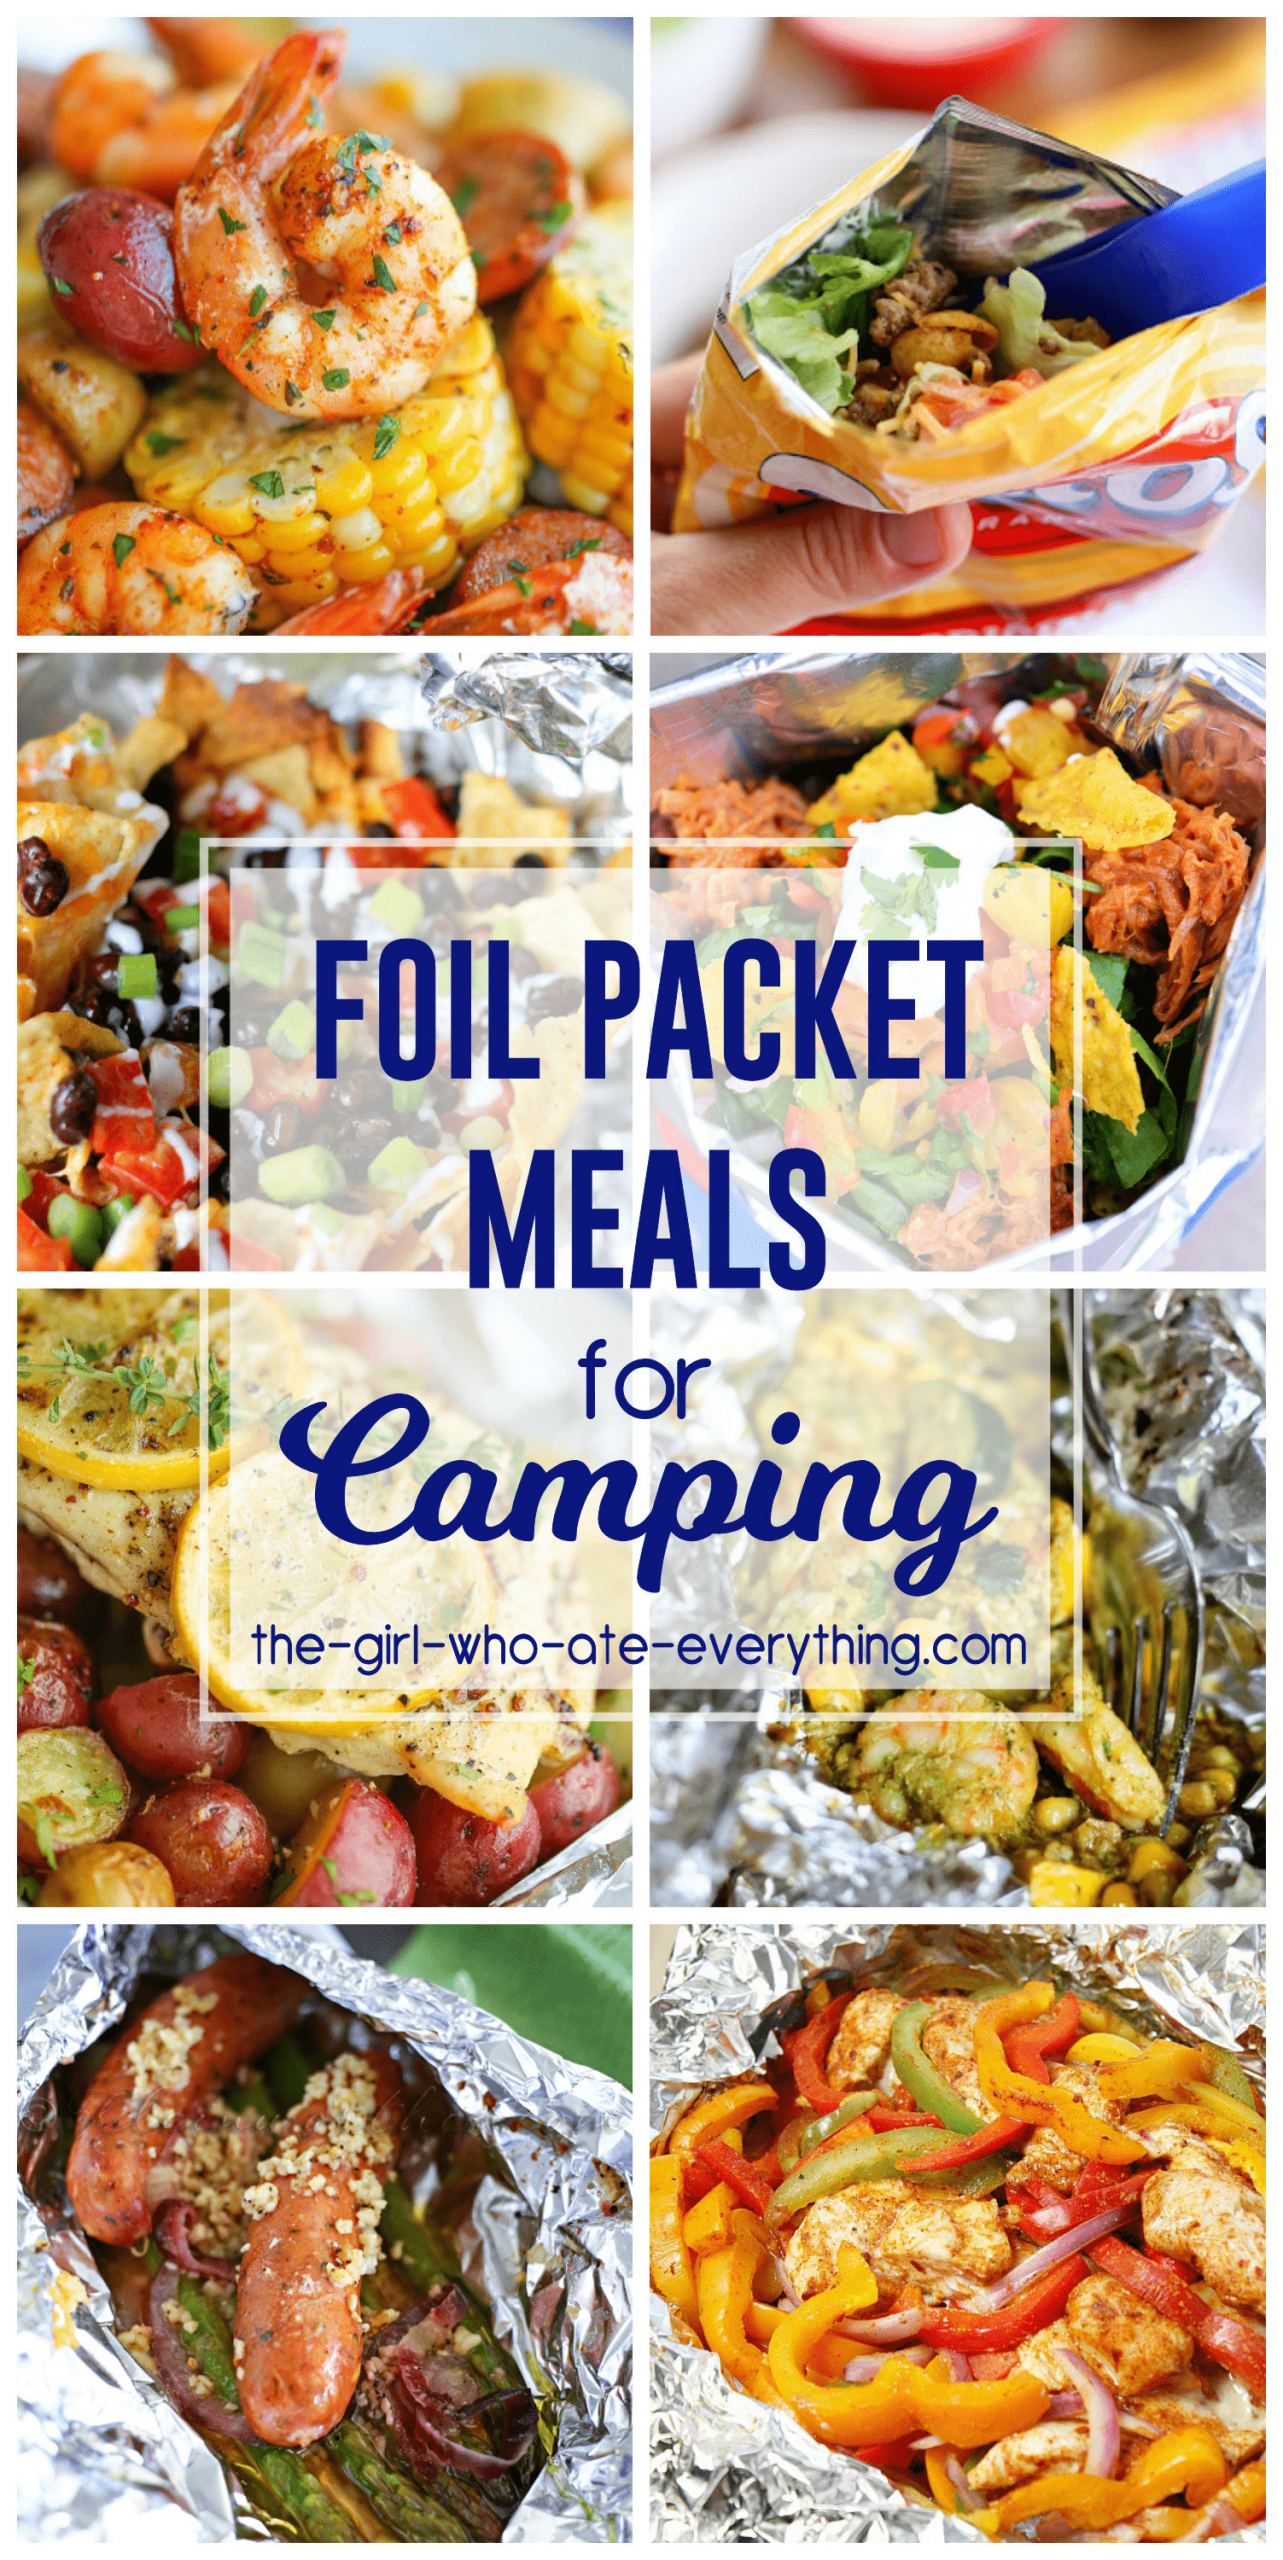 Camping Dinner Recipes
 Foil Packet Meals for Camping The Girl Who Ate Everything